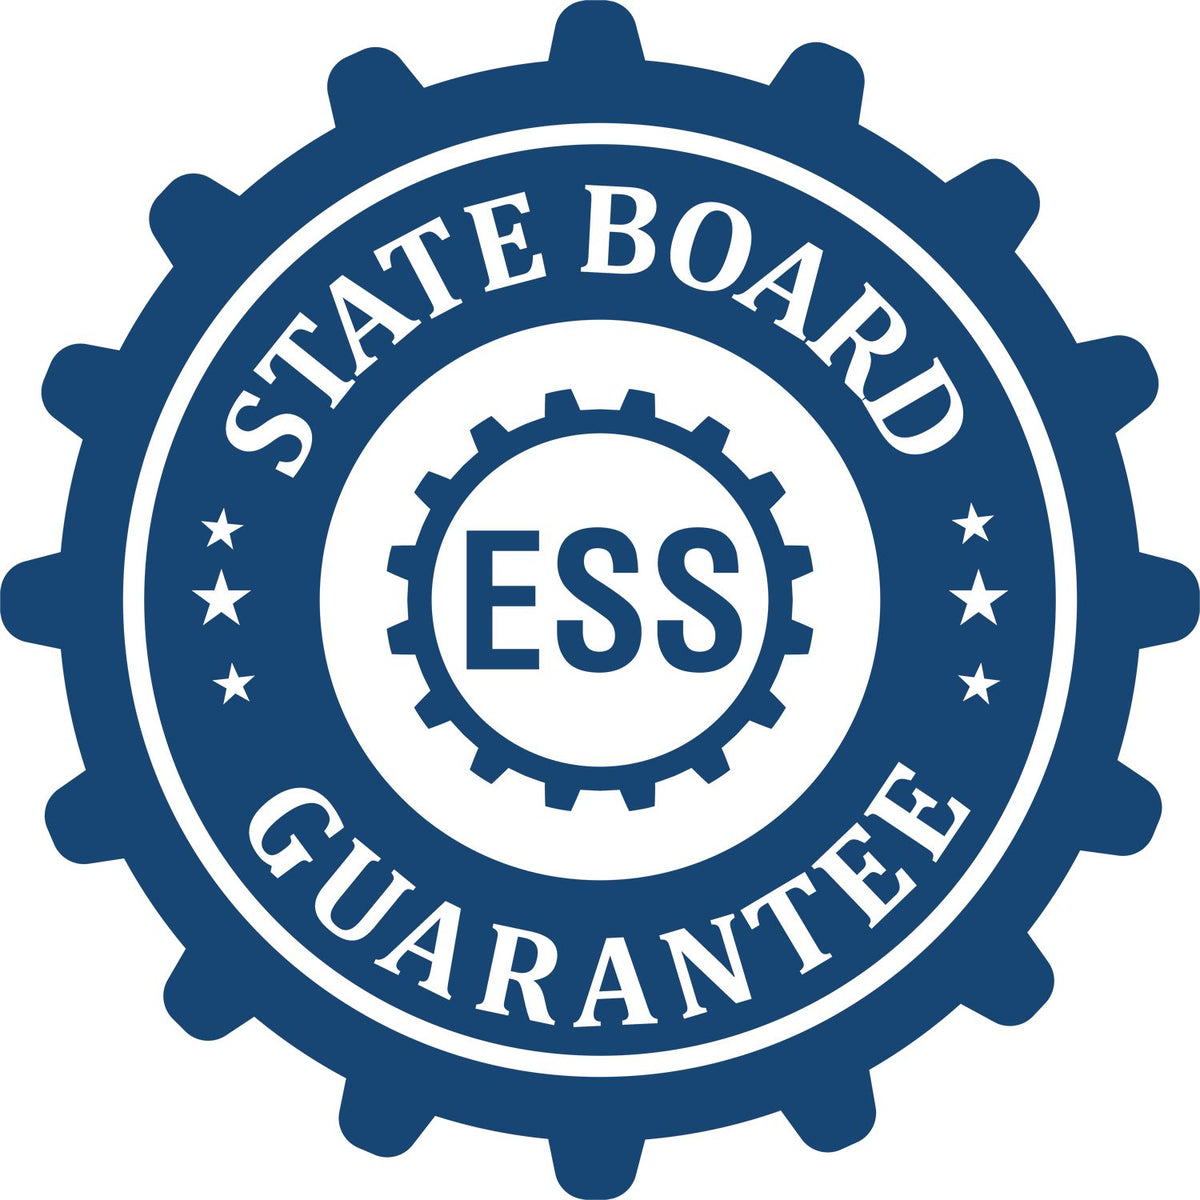 An emblem in a gear shape illustrating a state board guarantee for the Hybrid Kentucky Engineer Seal